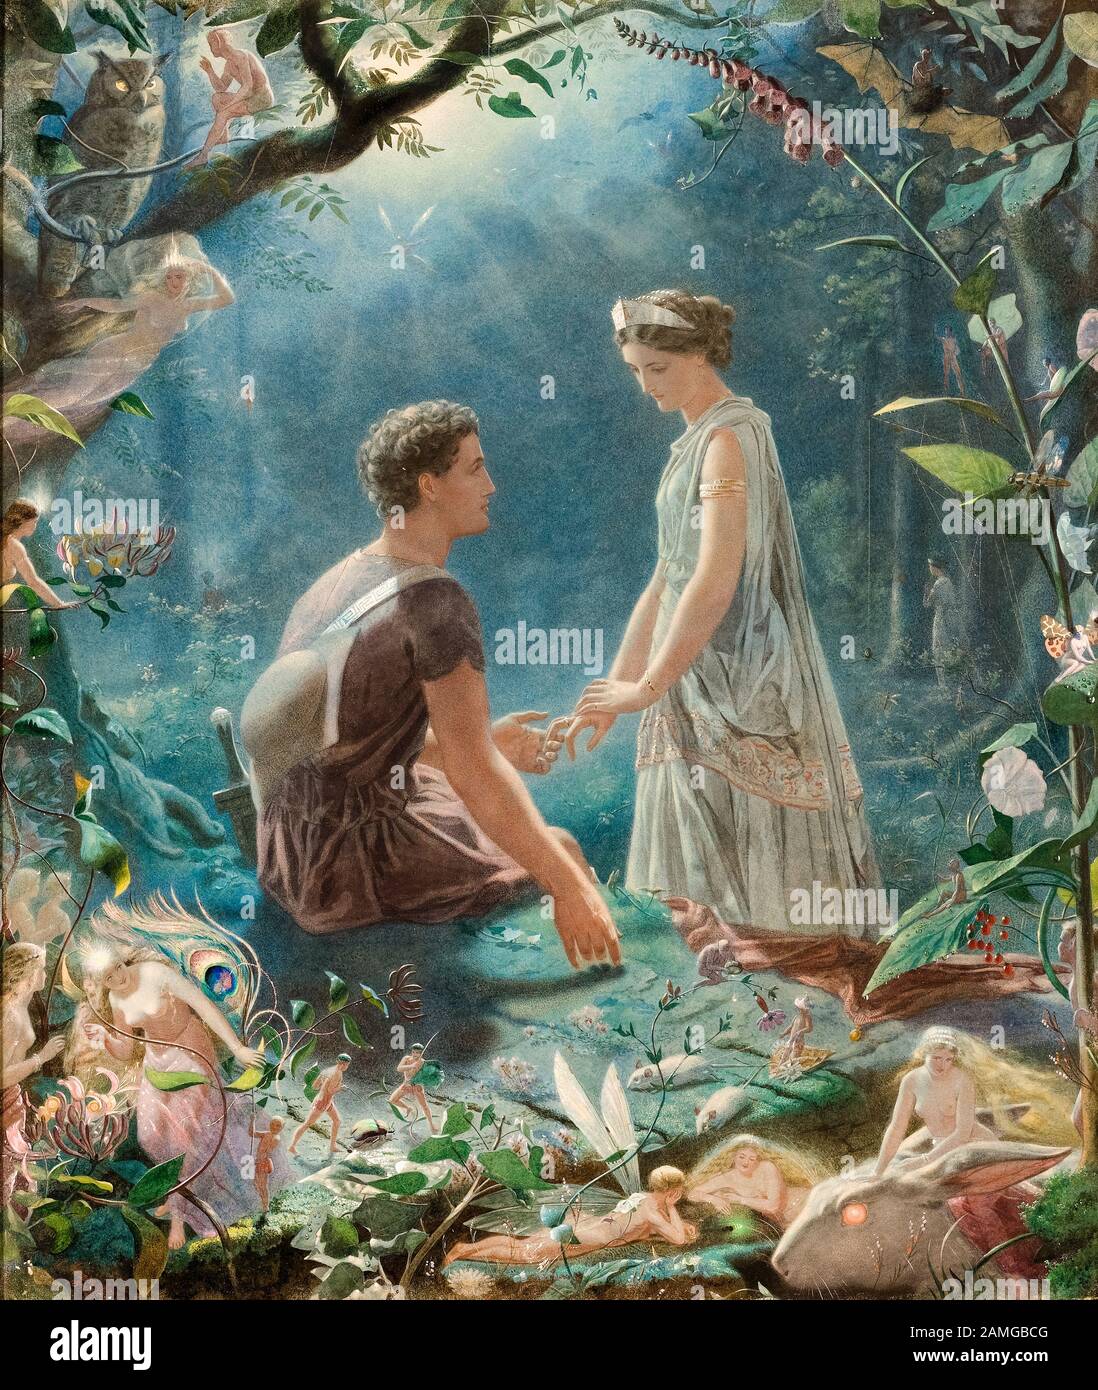 John Simmons, Hermia and Lysander, A Midsummer Night's Dream, painting, 1870 Stock Photo